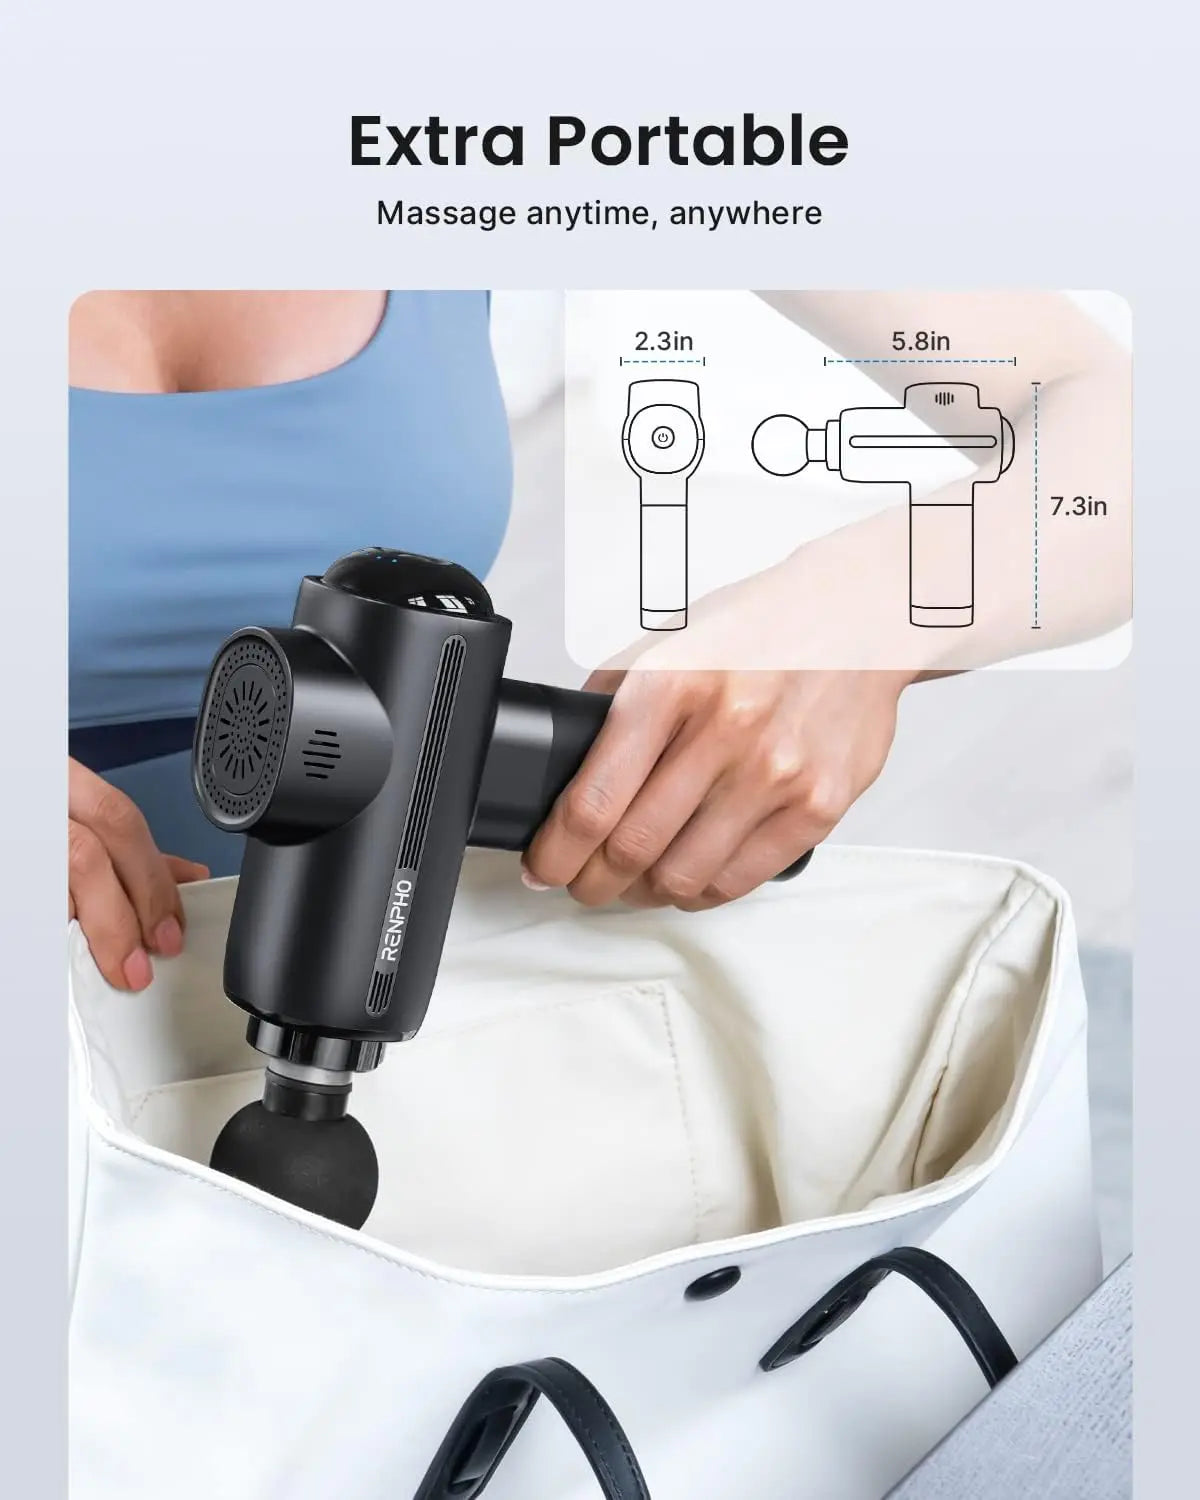 A person places a RENPHO Active Thermacool Massage Gun by Renpho EU into a white bag with black handles. The text "Extra Portable" appears at the top of the image, emphasizing its utility for deep tissue massage. An inset diagram to the upper right shows a labeled sketch of the RENPHO Active Thermacool Massage Gun with dimensions: 2.3 inches wide, 5.8 inches long, and 7.3 inches tall.